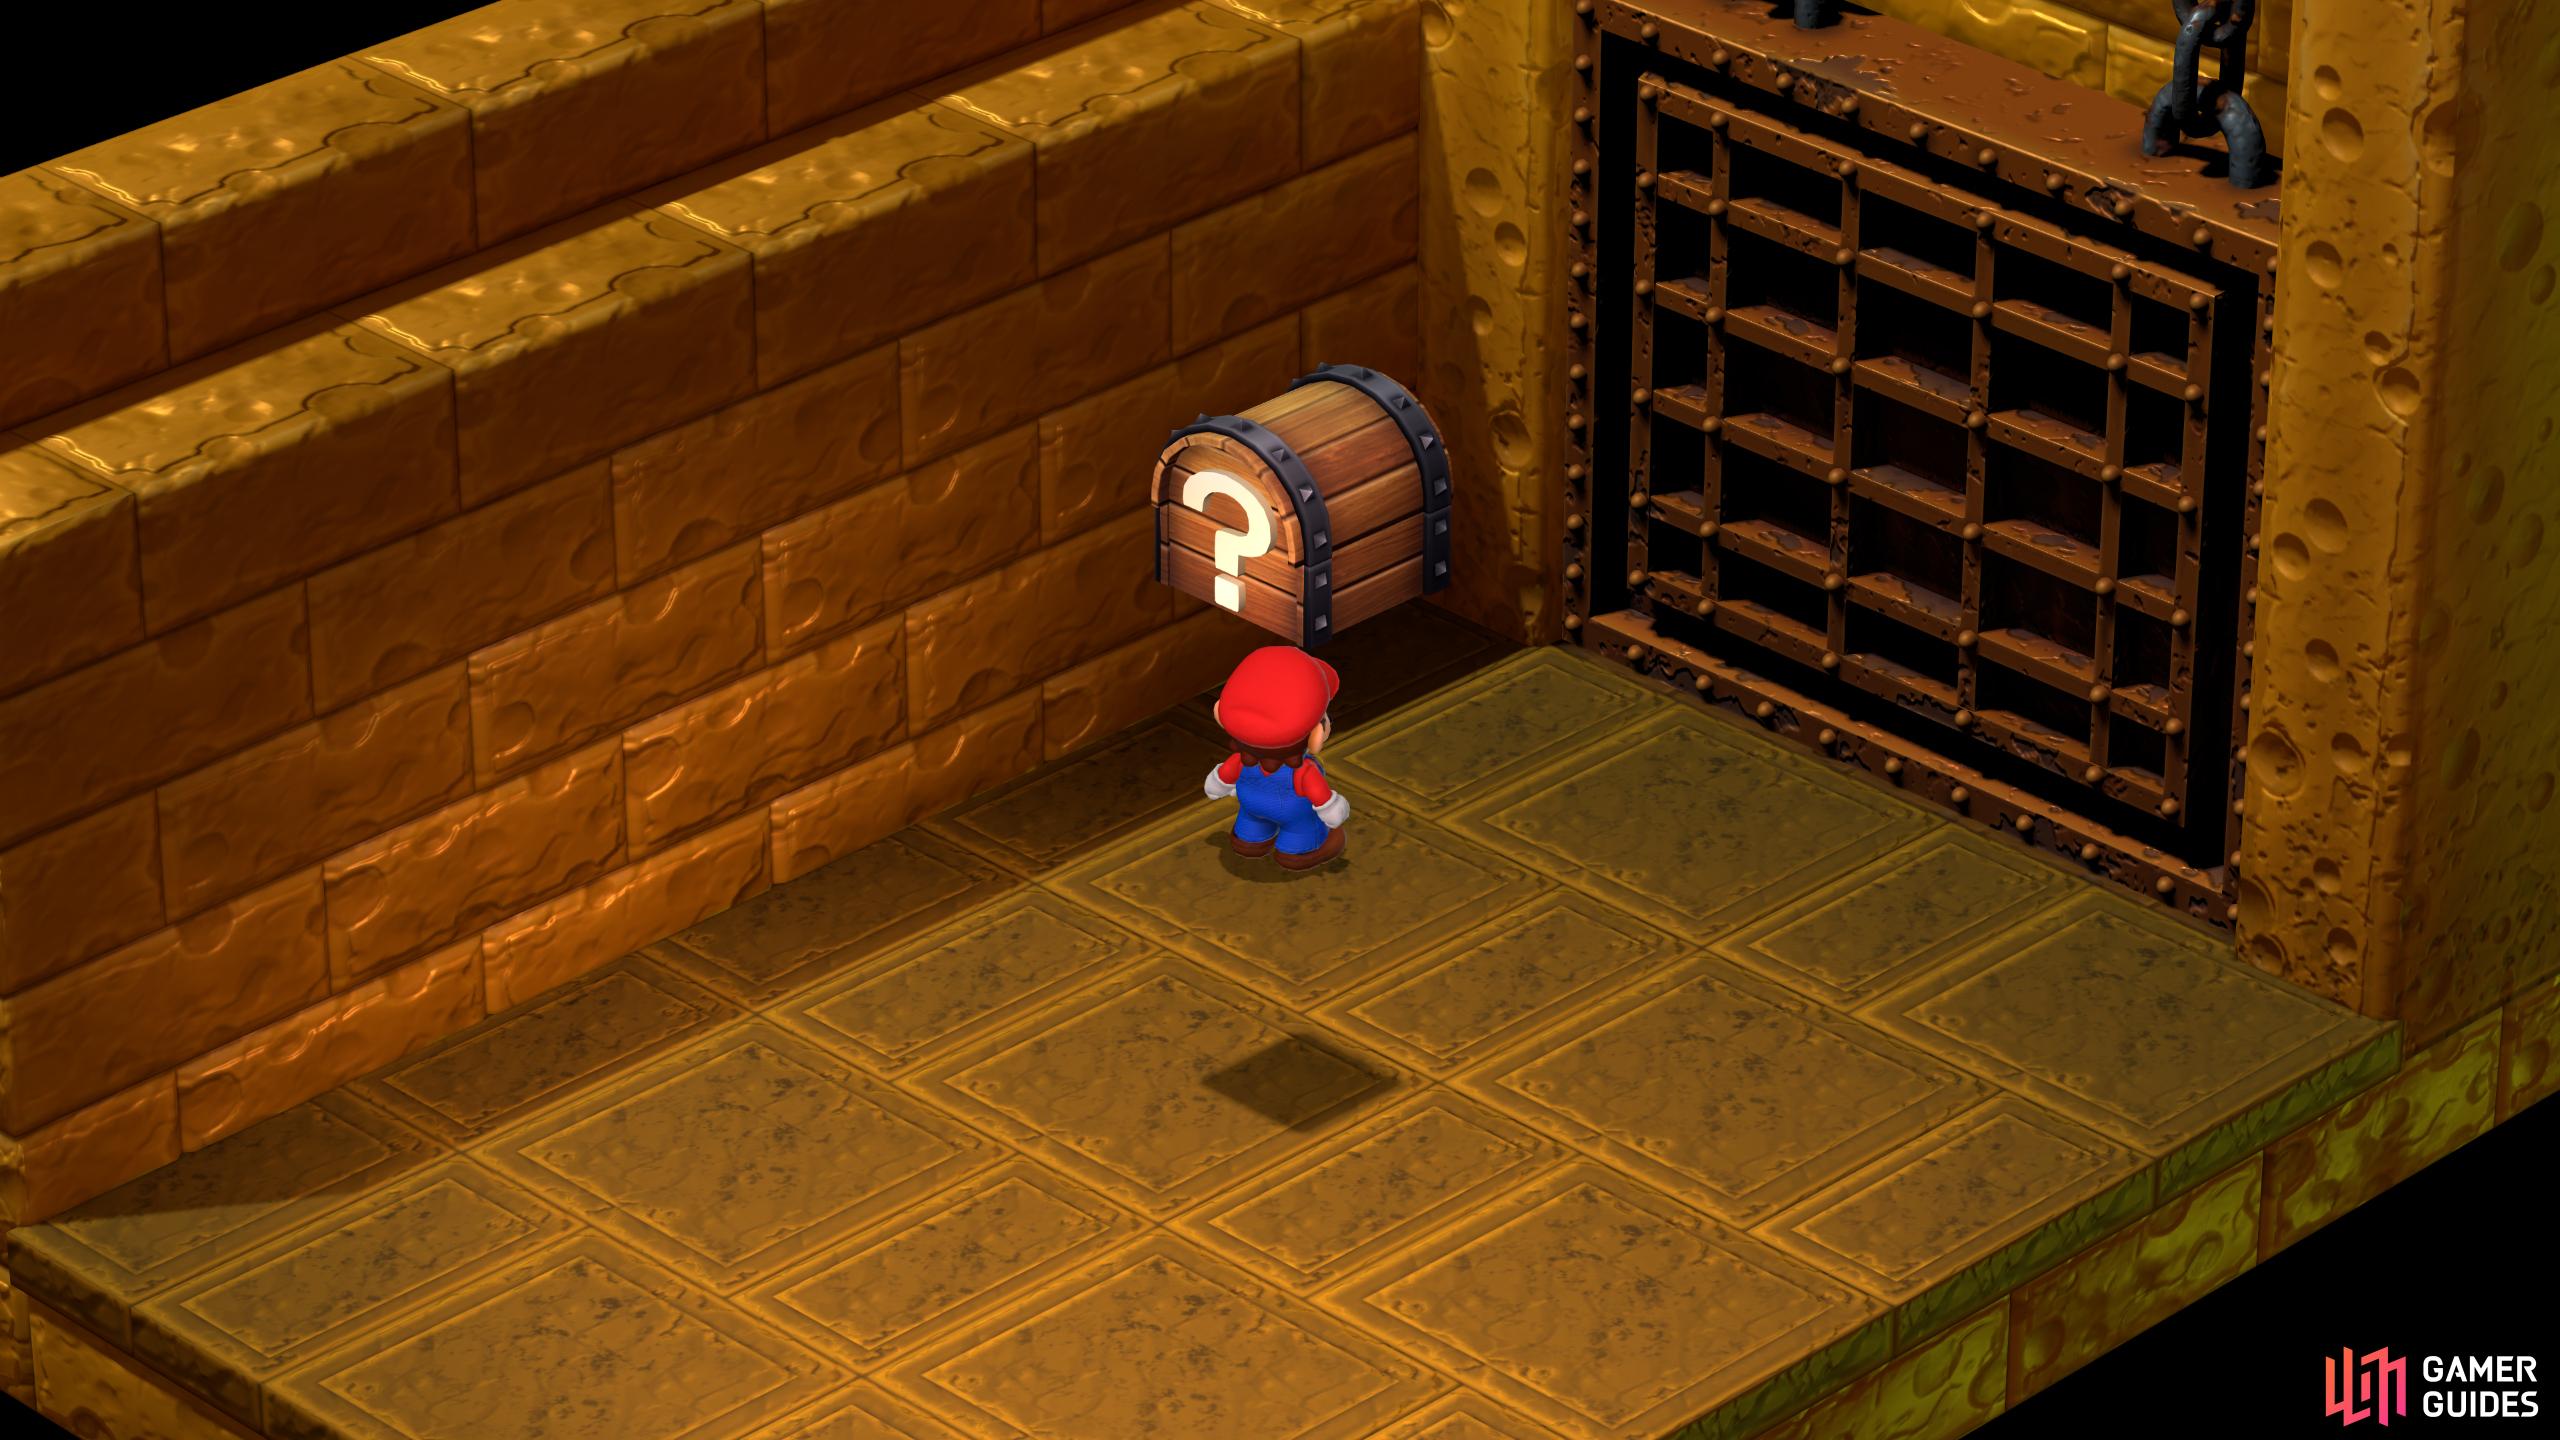 Fortune Minigame: Once you've chosen your reward, open the chest in front of the gate to collect your winnings.